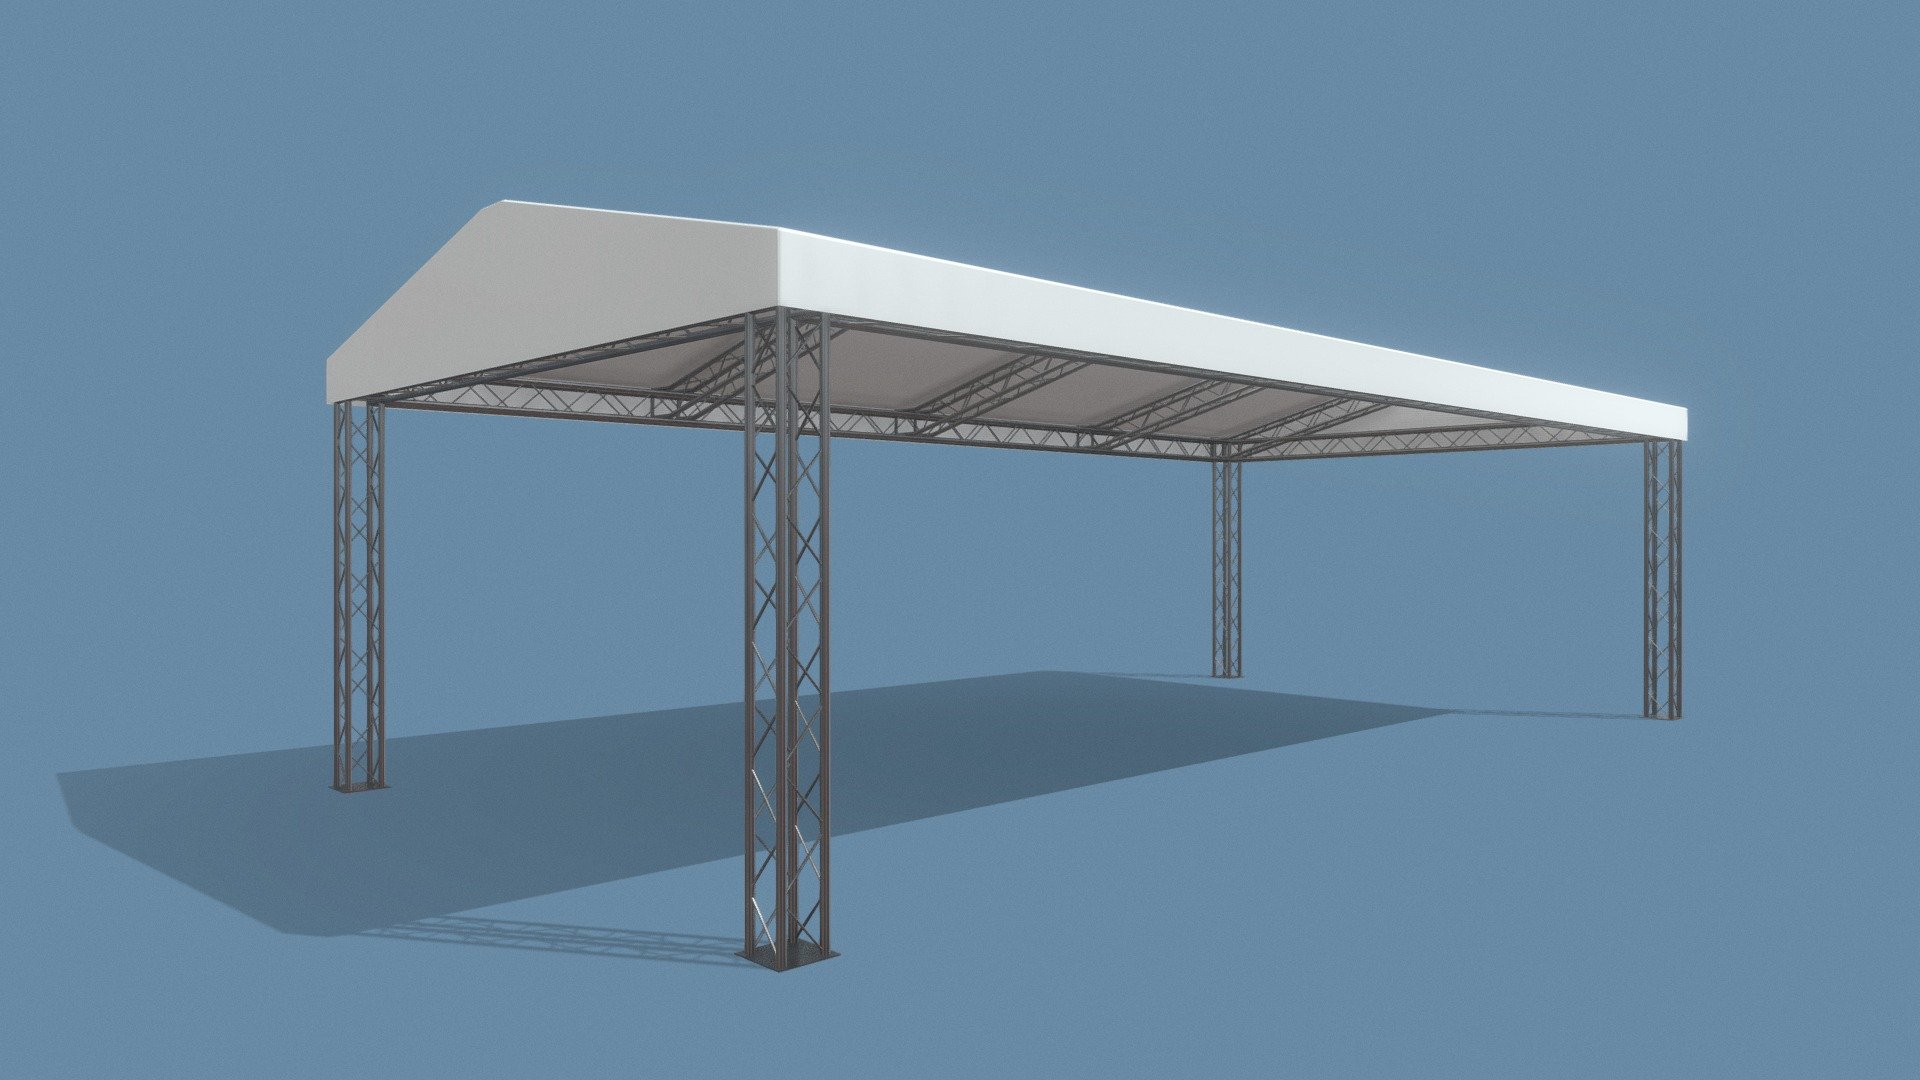 Rectangular Tent 12x6 Meters

Measurements:




12.00m x 6.00m x 4.00m (L,W,H)

Highest Part of the Tent is 4.00m

Lowest Part of the Tent is 3.00m

IMPORTANT NOTES:




This model does not have textures or materials, but it has separate generic materials, it is also separated into parts, so you can easily assign your own materials.

Model units are in meters.

If you have any questions about this model, you can send us a message 3d model